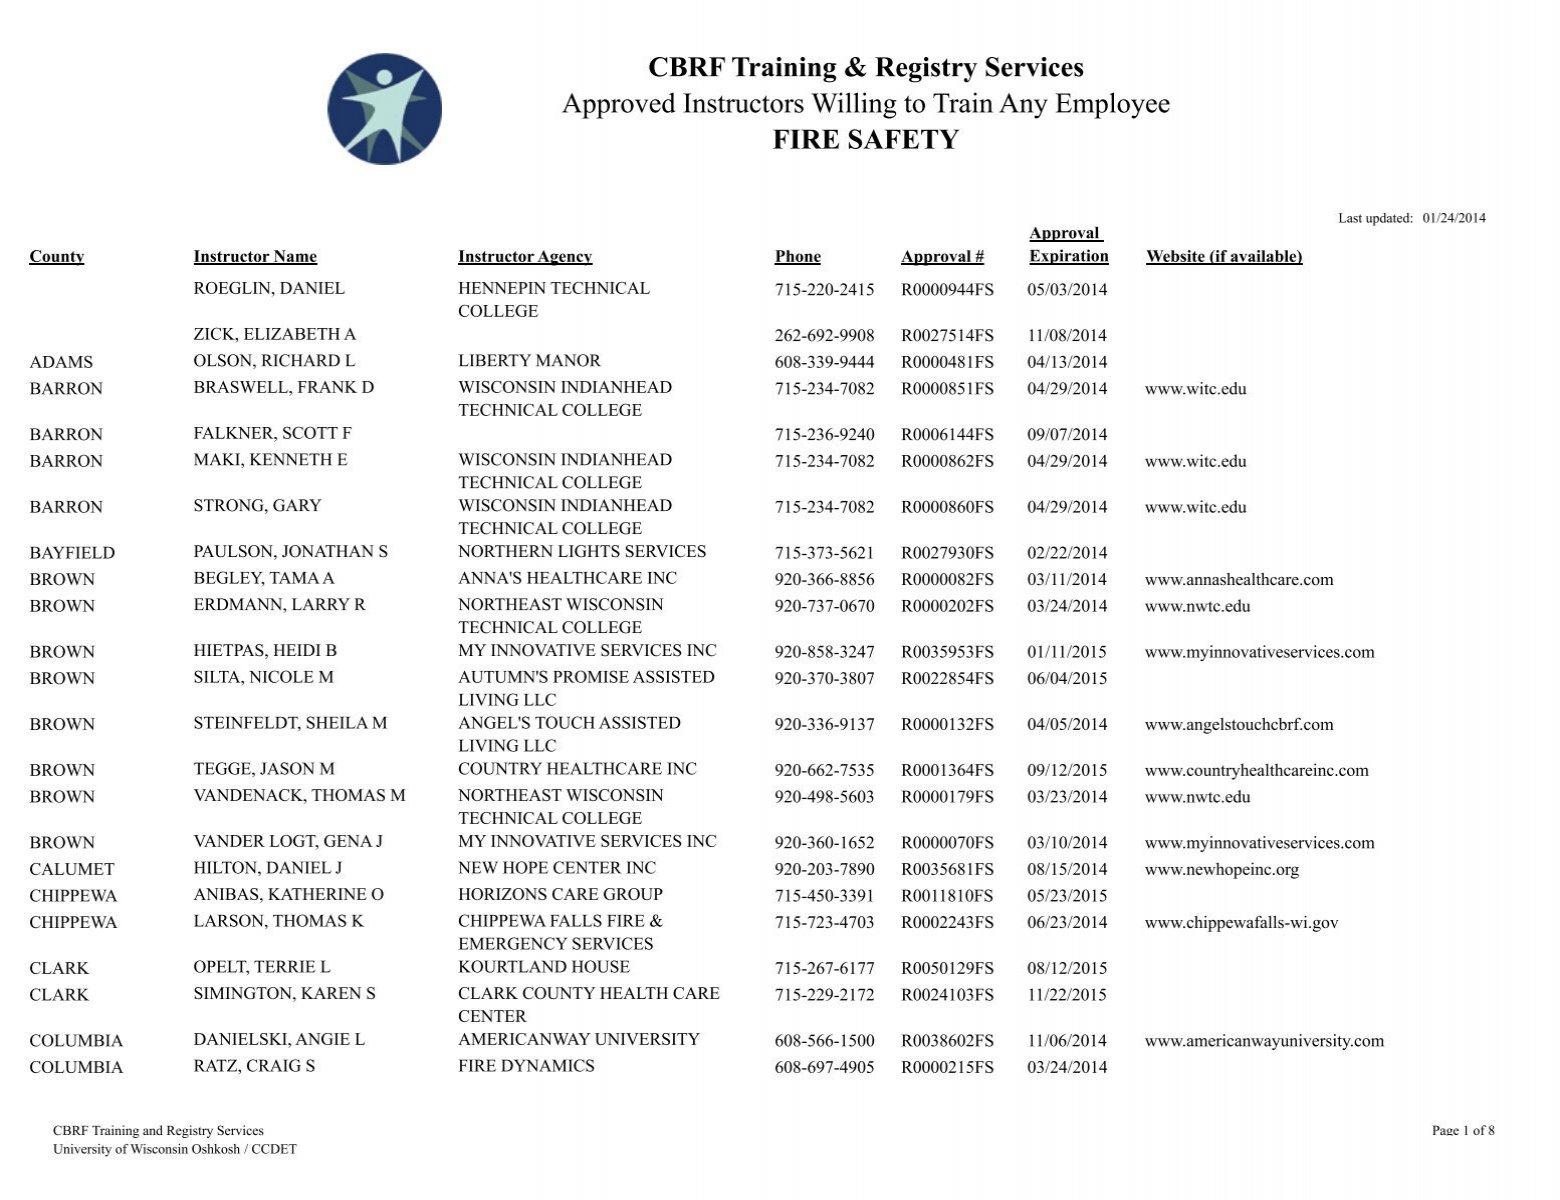 CBRF Training Registry Services Approved Instructors Willing to